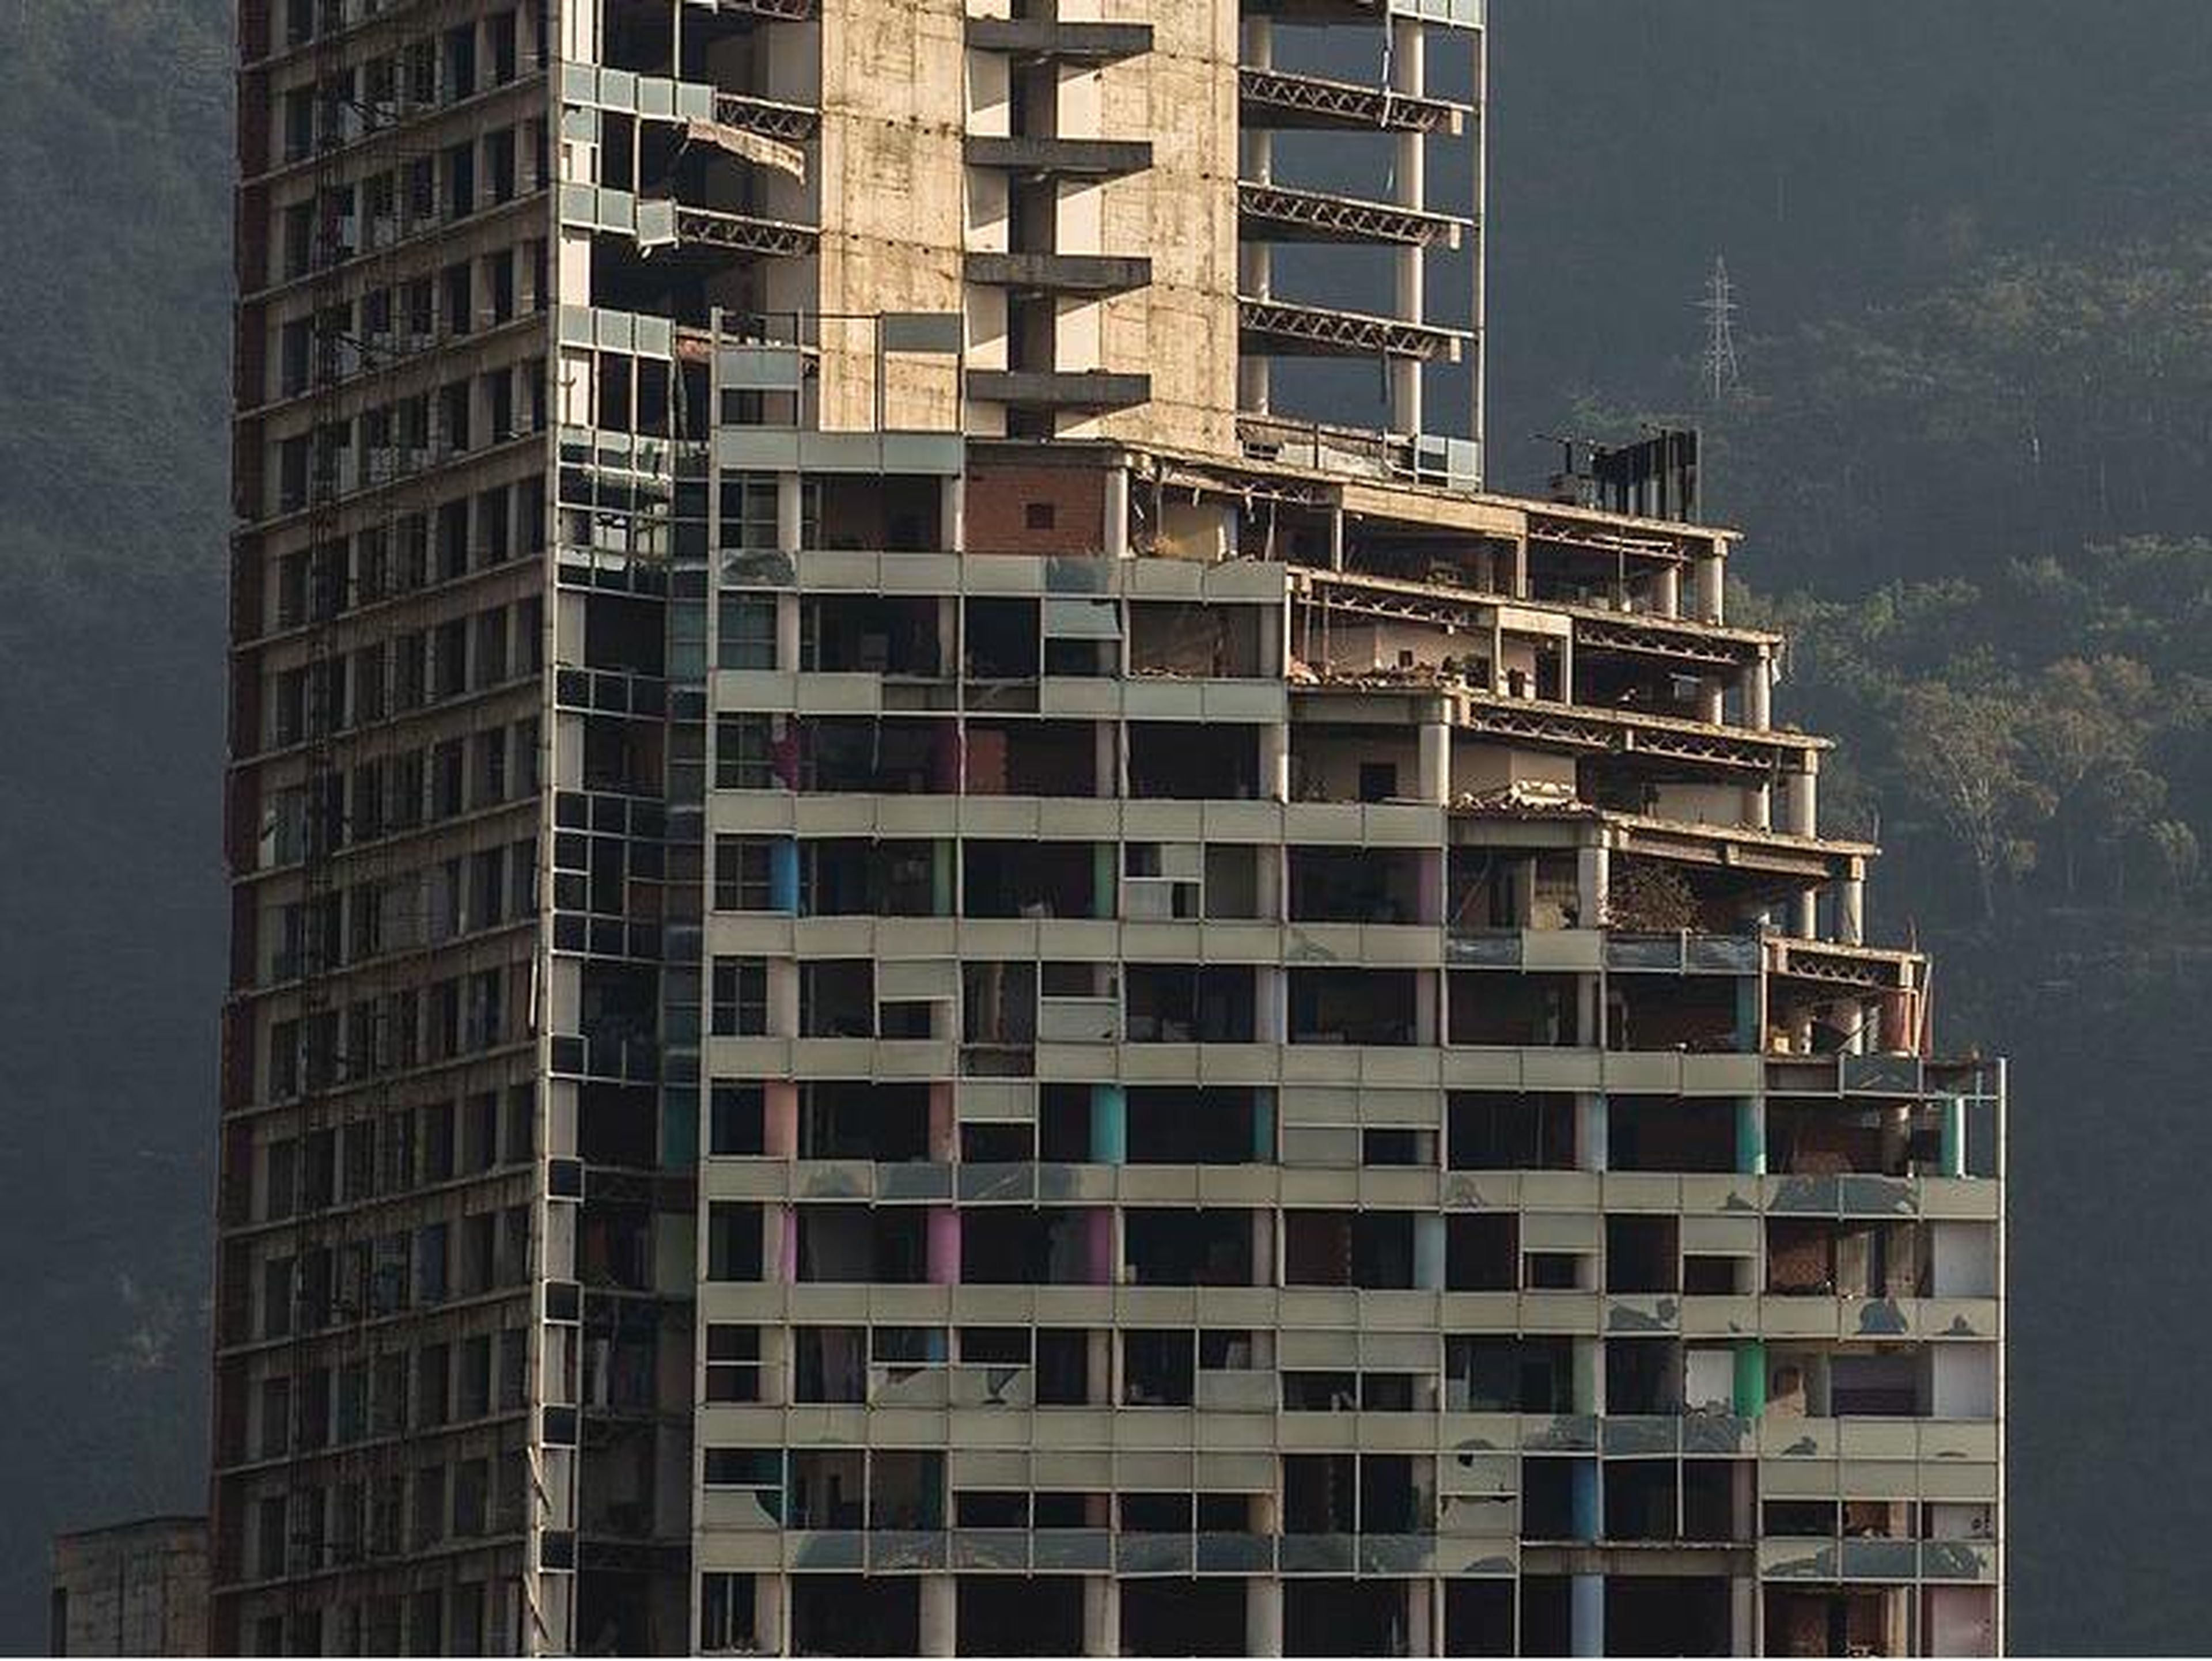 This skyscraper in Caracas remains unfinished.